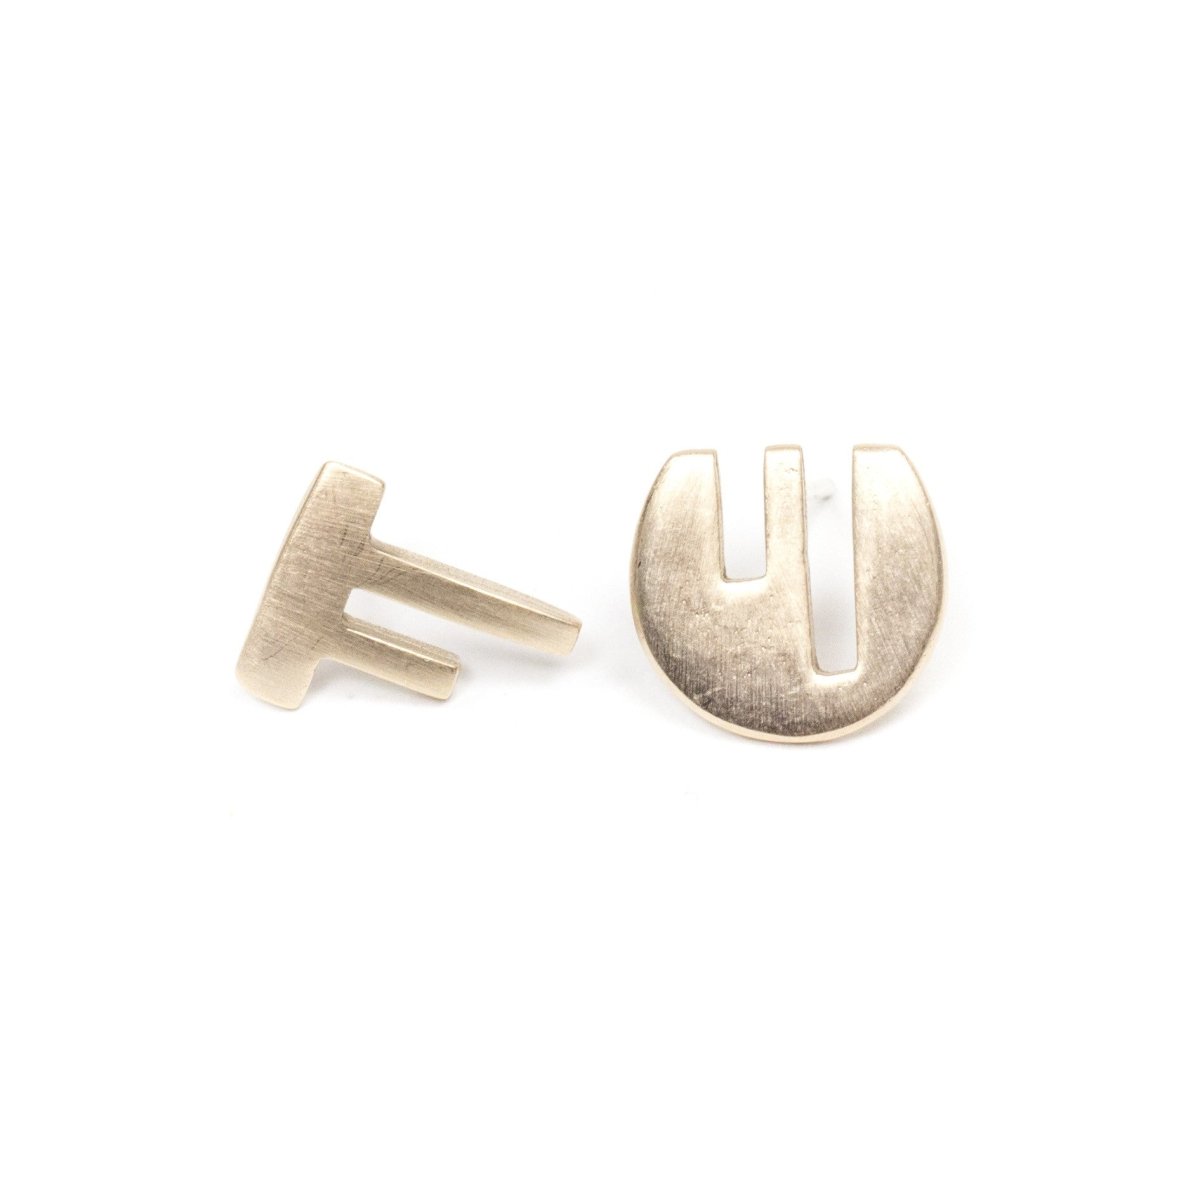 A pair of mismatched, bronze stud earrings, with complementary geometric cutouts that fit into one another like puzzle pieces. Hand-crafted in Portland, Oregon.